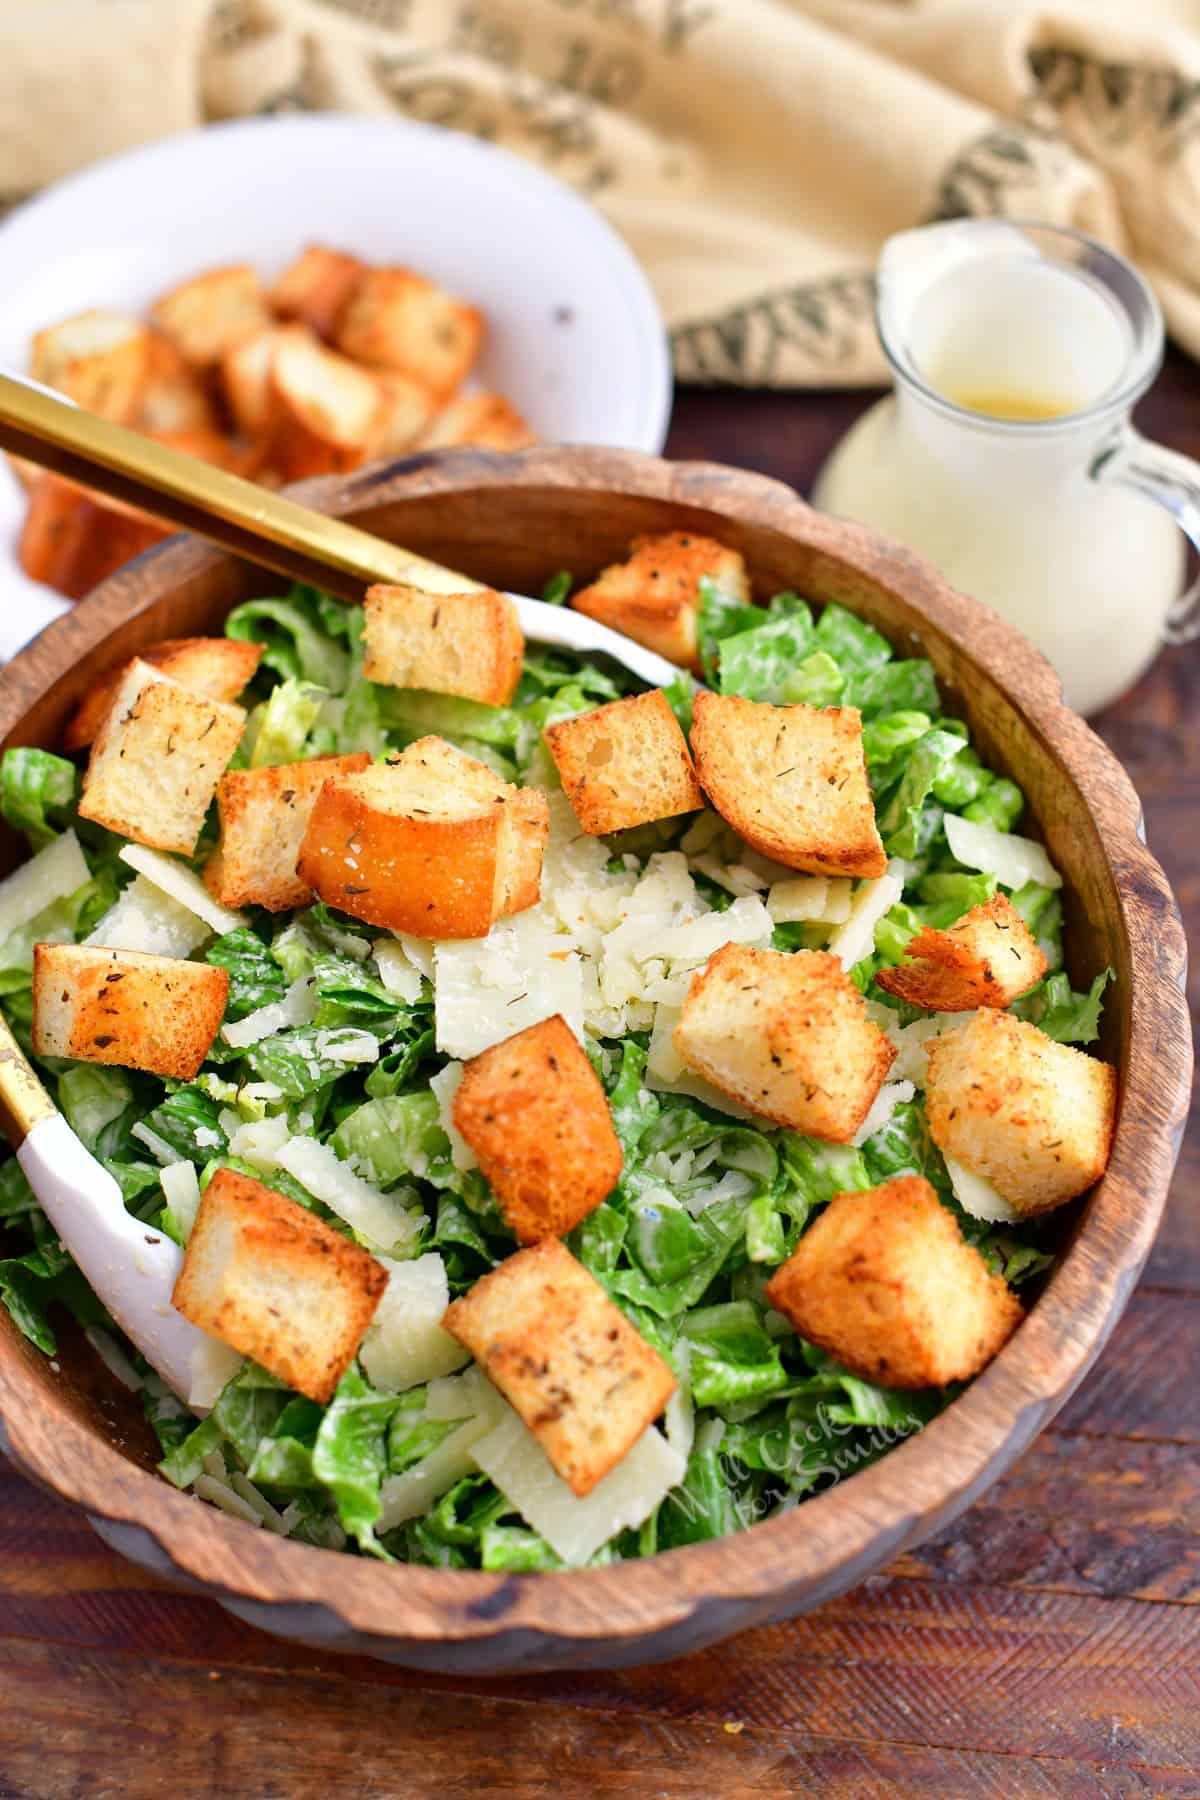 Caesar Salad with Homemade Caesar Dressing and Croutons